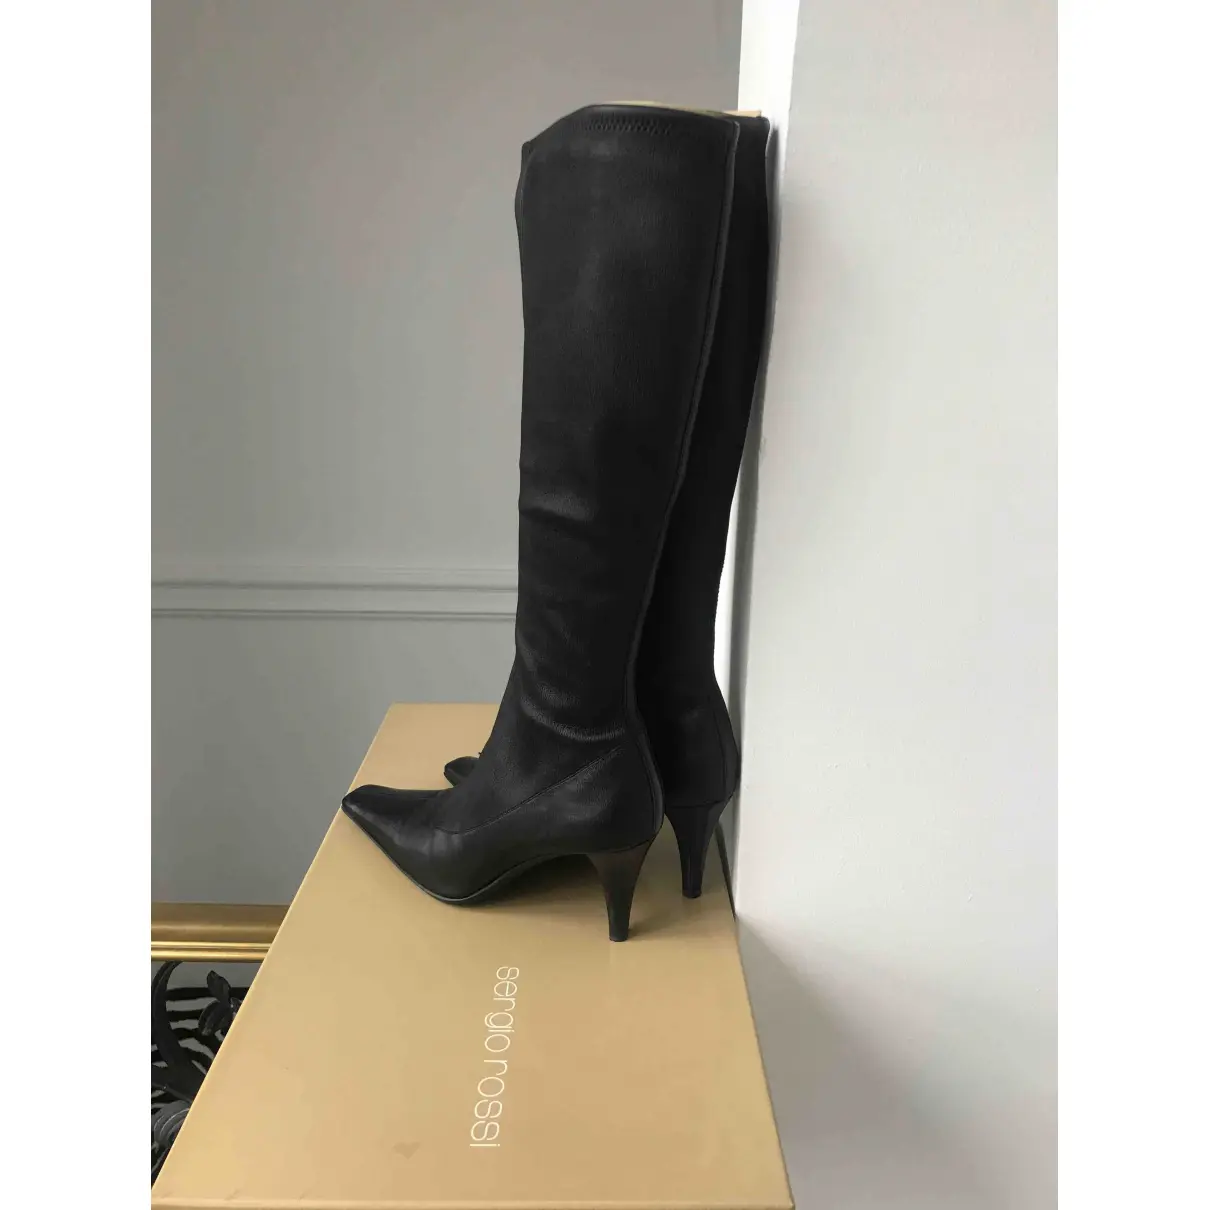 Buy Sergio Rossi Leather boots online